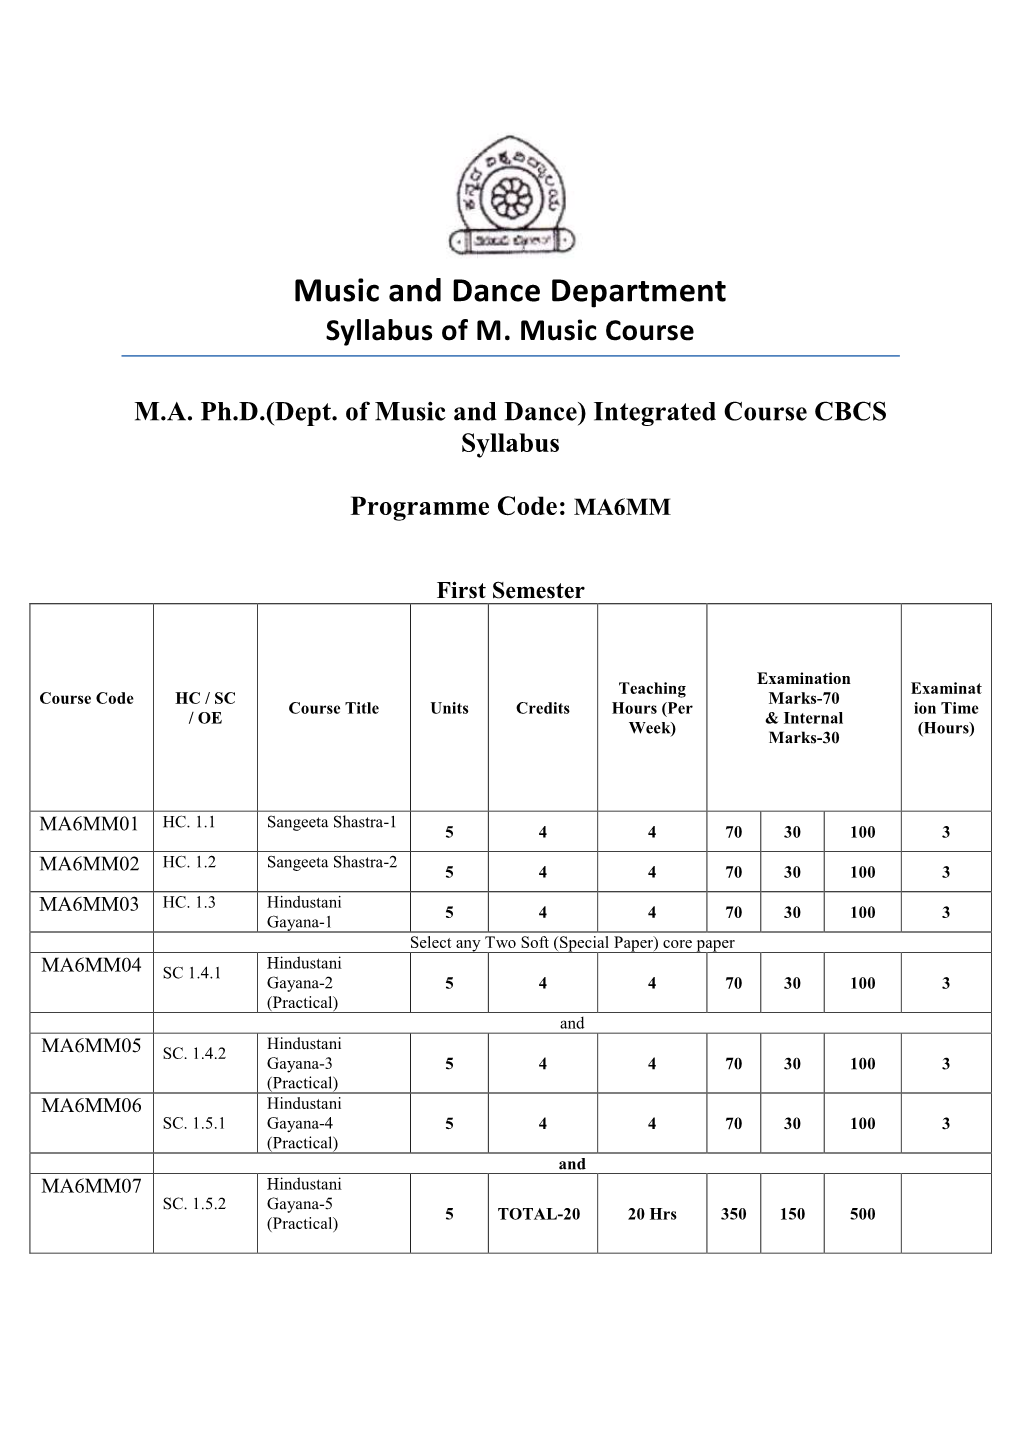 Music and Dance Department Syllabus of M. Music Course